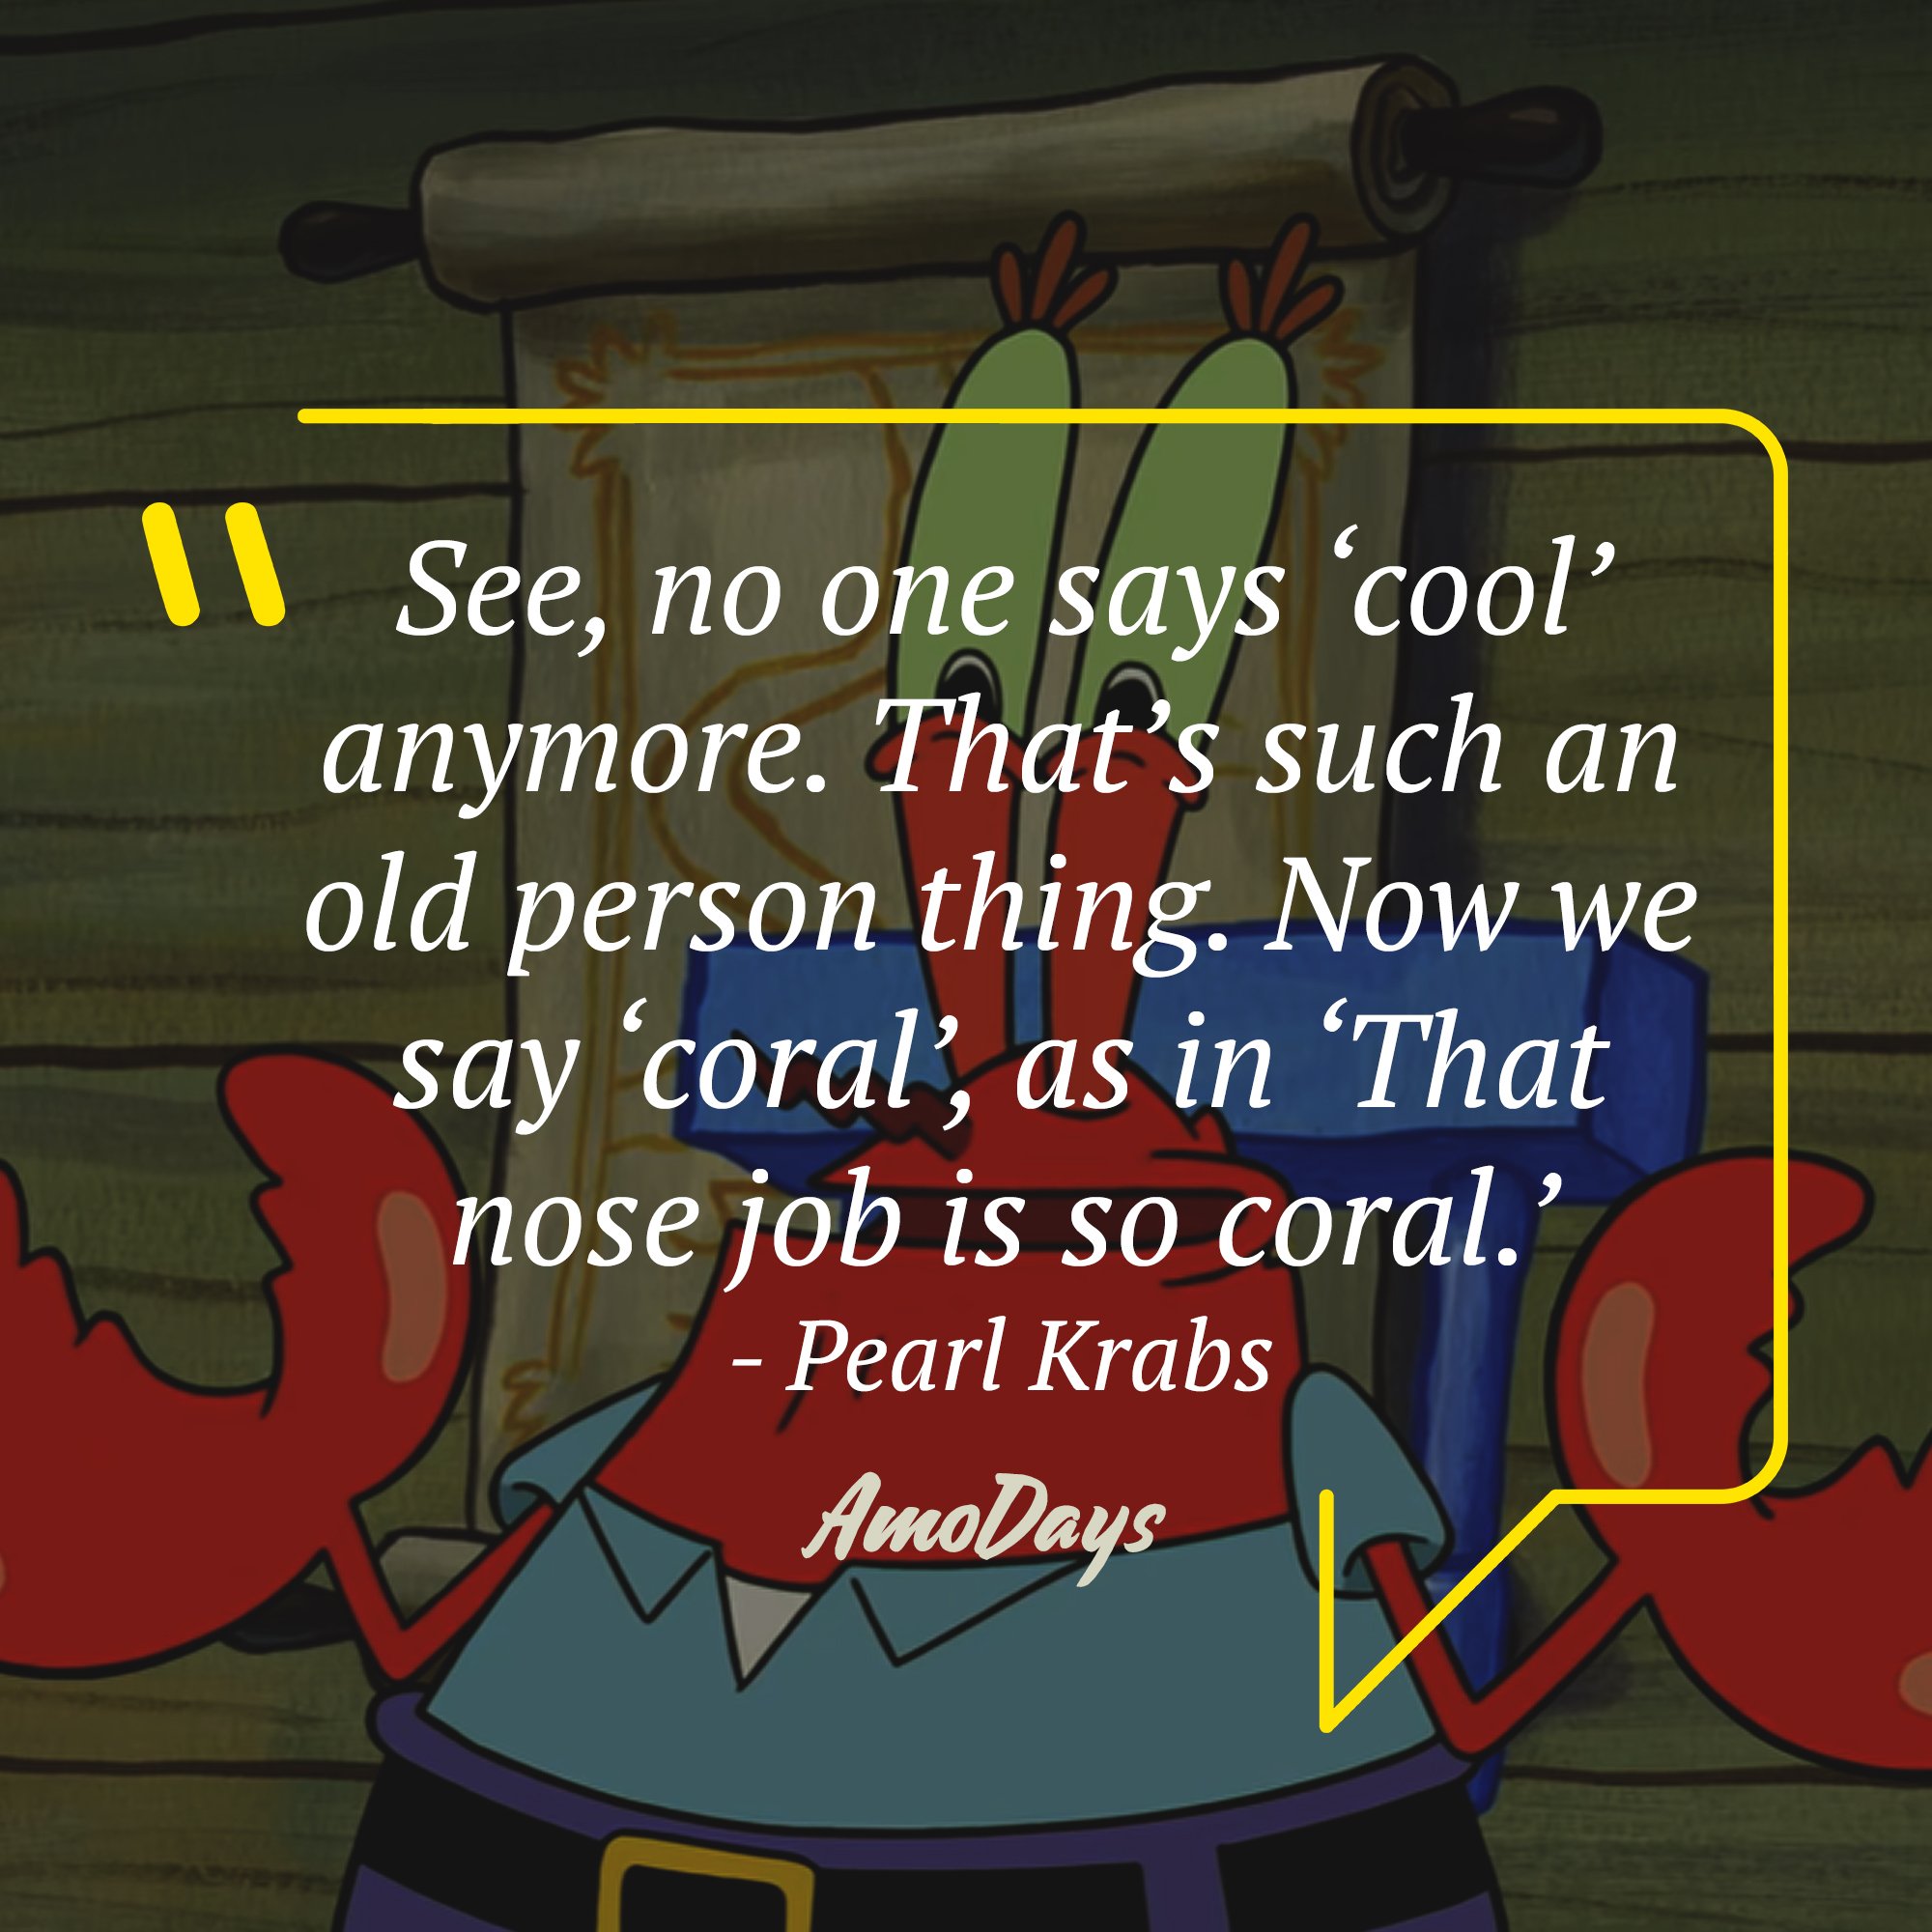 Pearl Krabs's quote: “See, no one says ‘cool’ anymore. That’s such an old person thing. Now we say ‘coral’, as in ‘That nose job is so coral.’" | Image: AmoDays